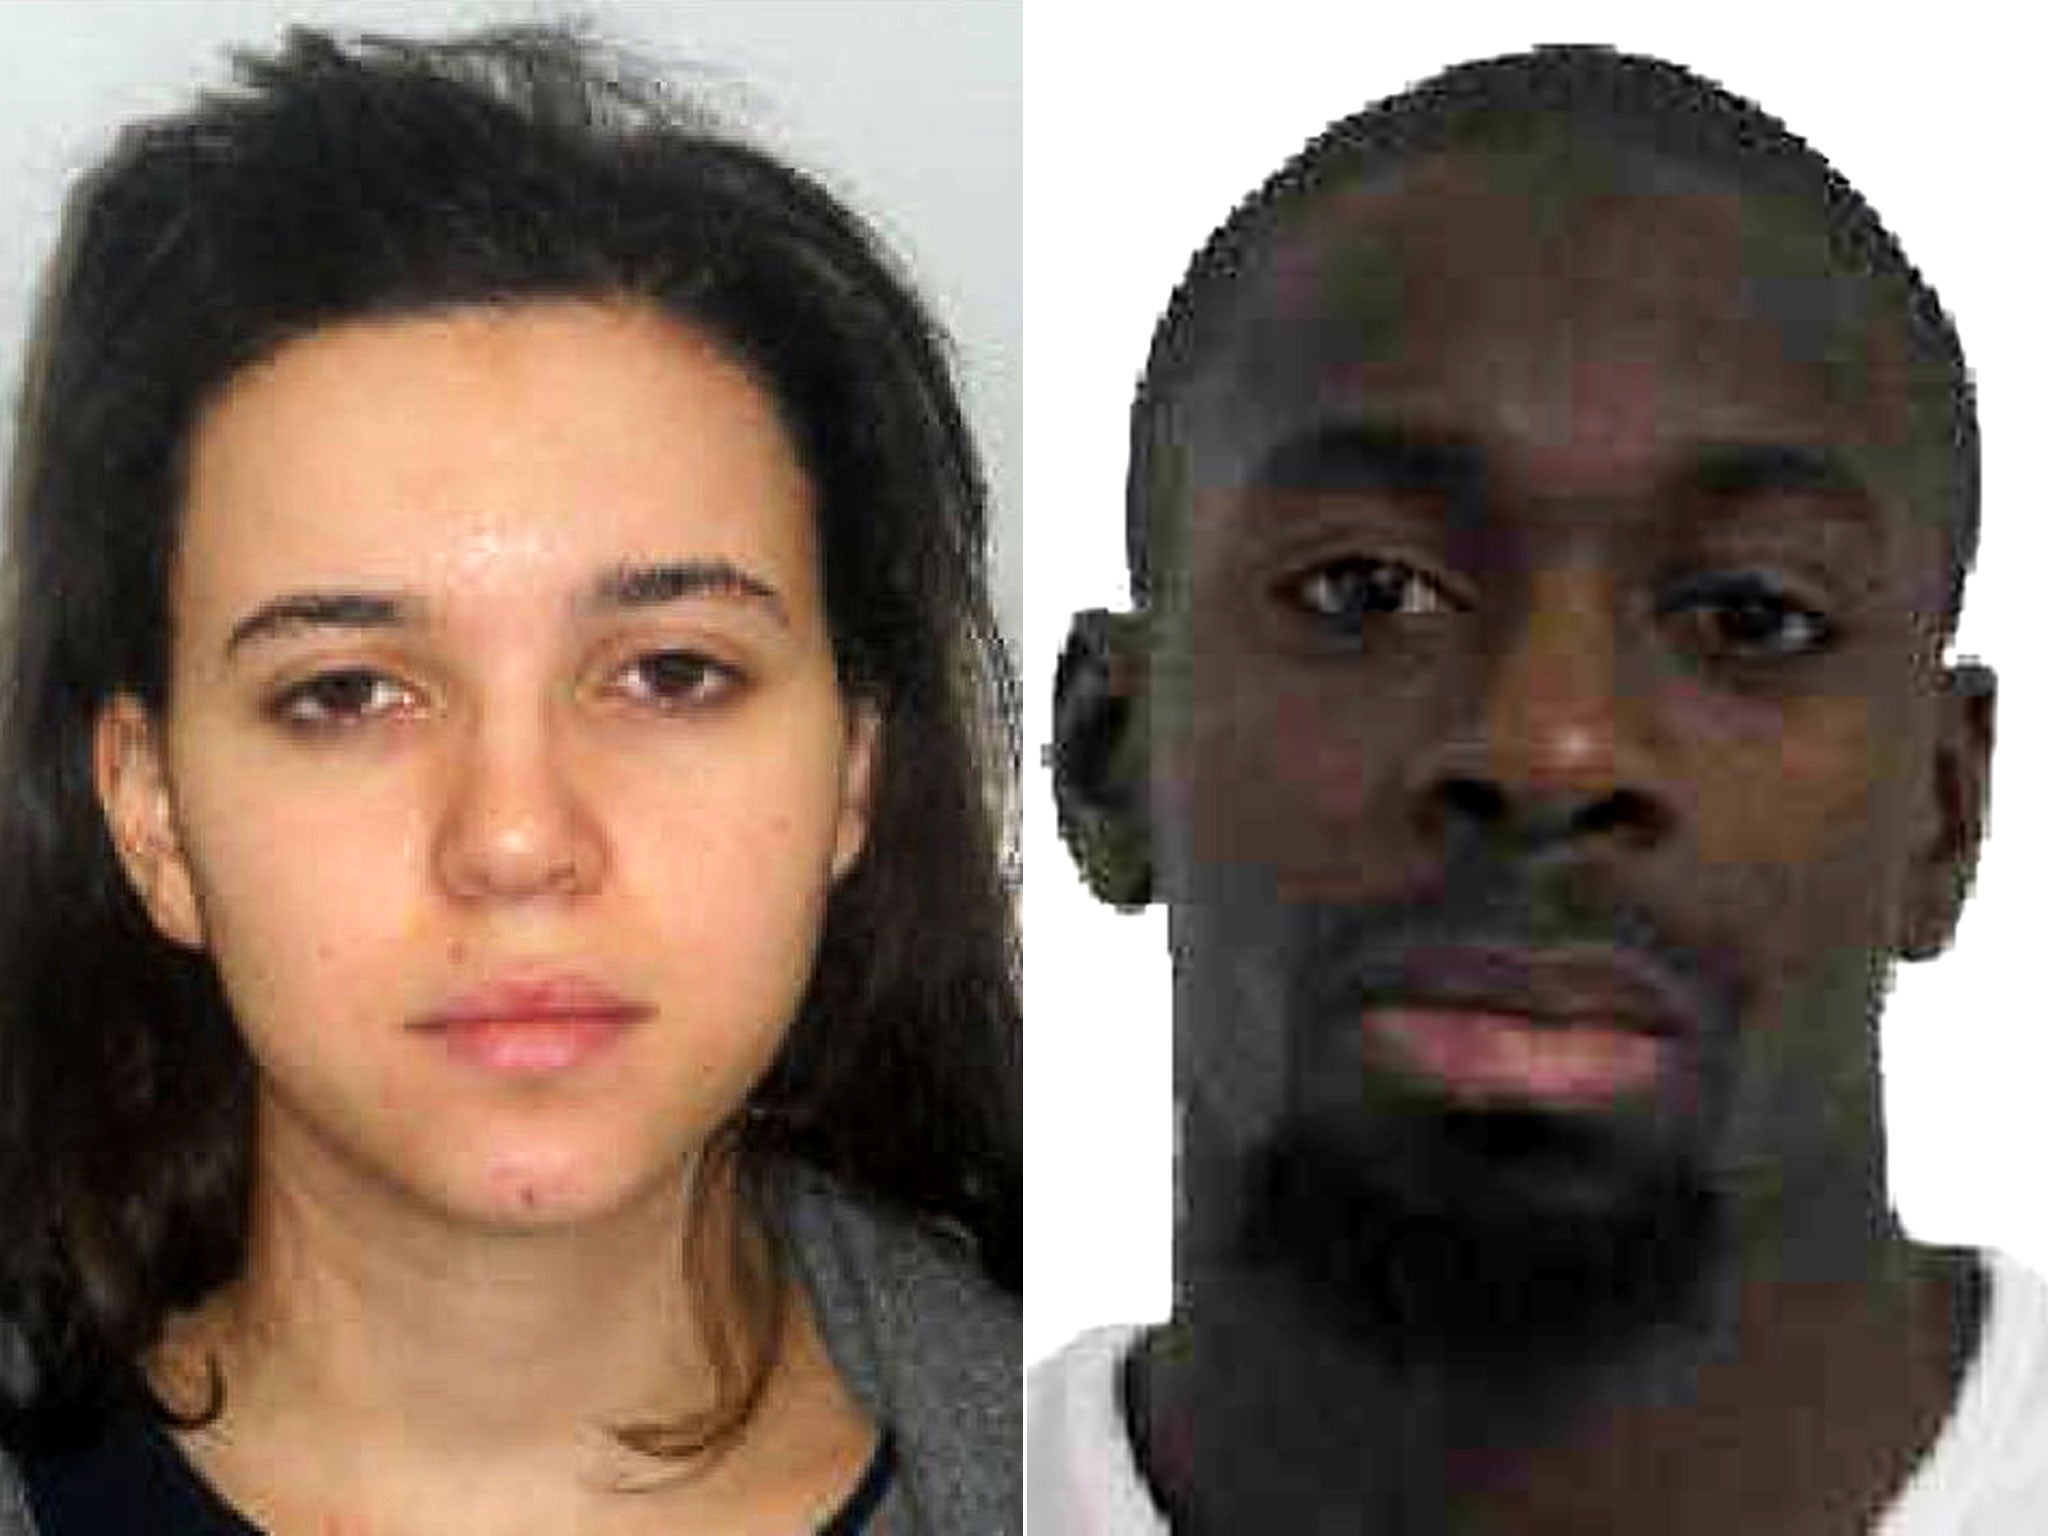 The 26-year-old is believed to have been in a relationship with Amedy Coulibaly since 2010